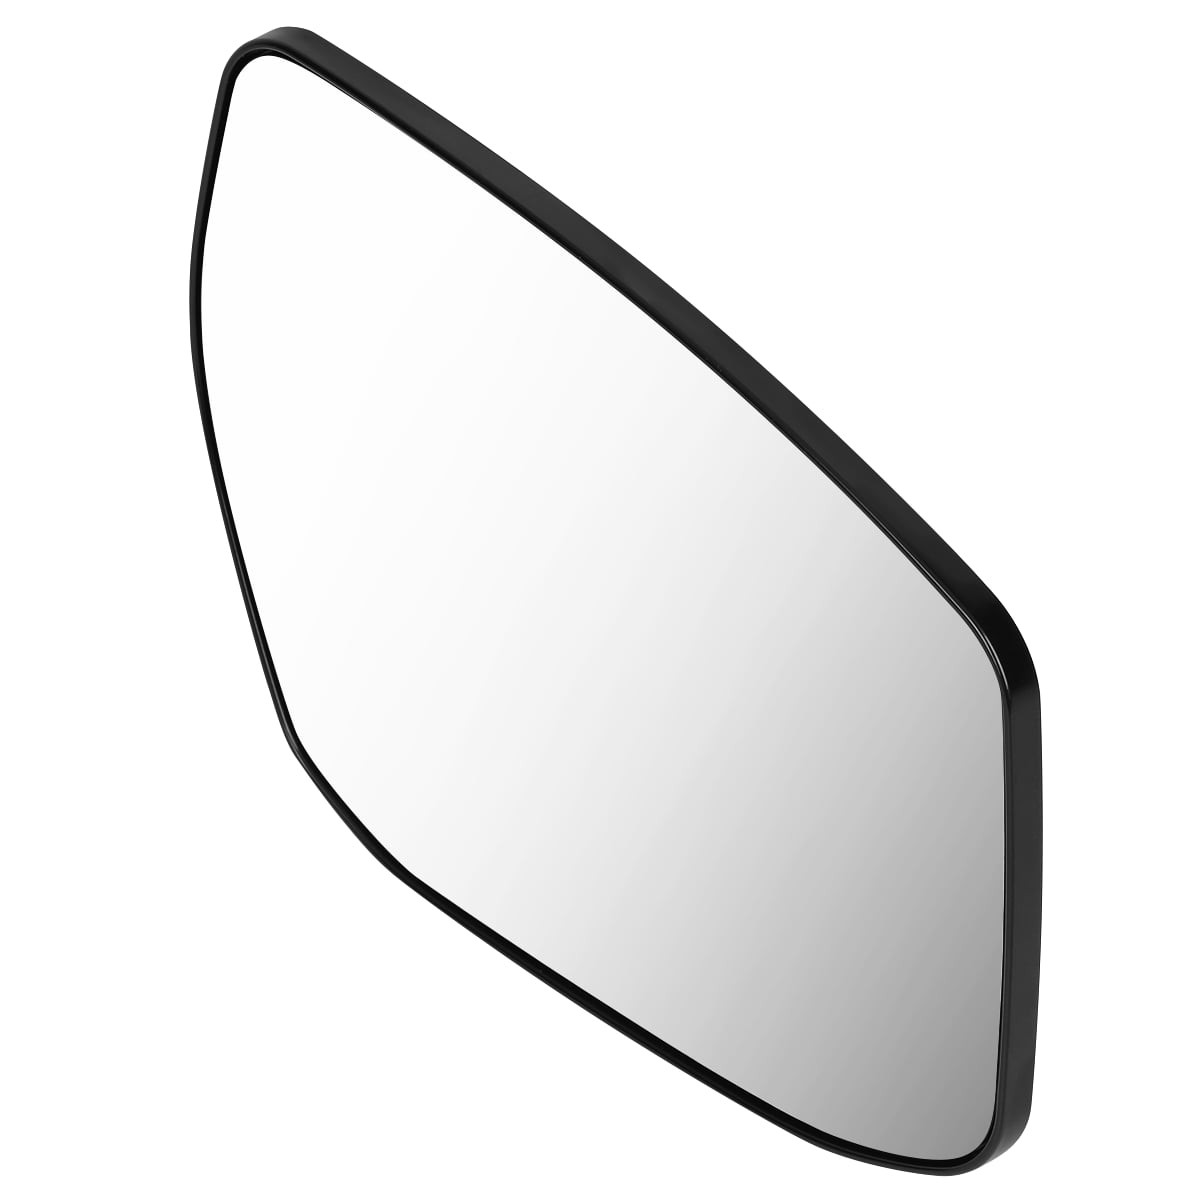 DNA Motoring OEM-MG-0416 963663TH0A OE Style Driver/Left Mirror Glass For 2013-2018 NISSAN ALTIMA SENTRA,Silver 